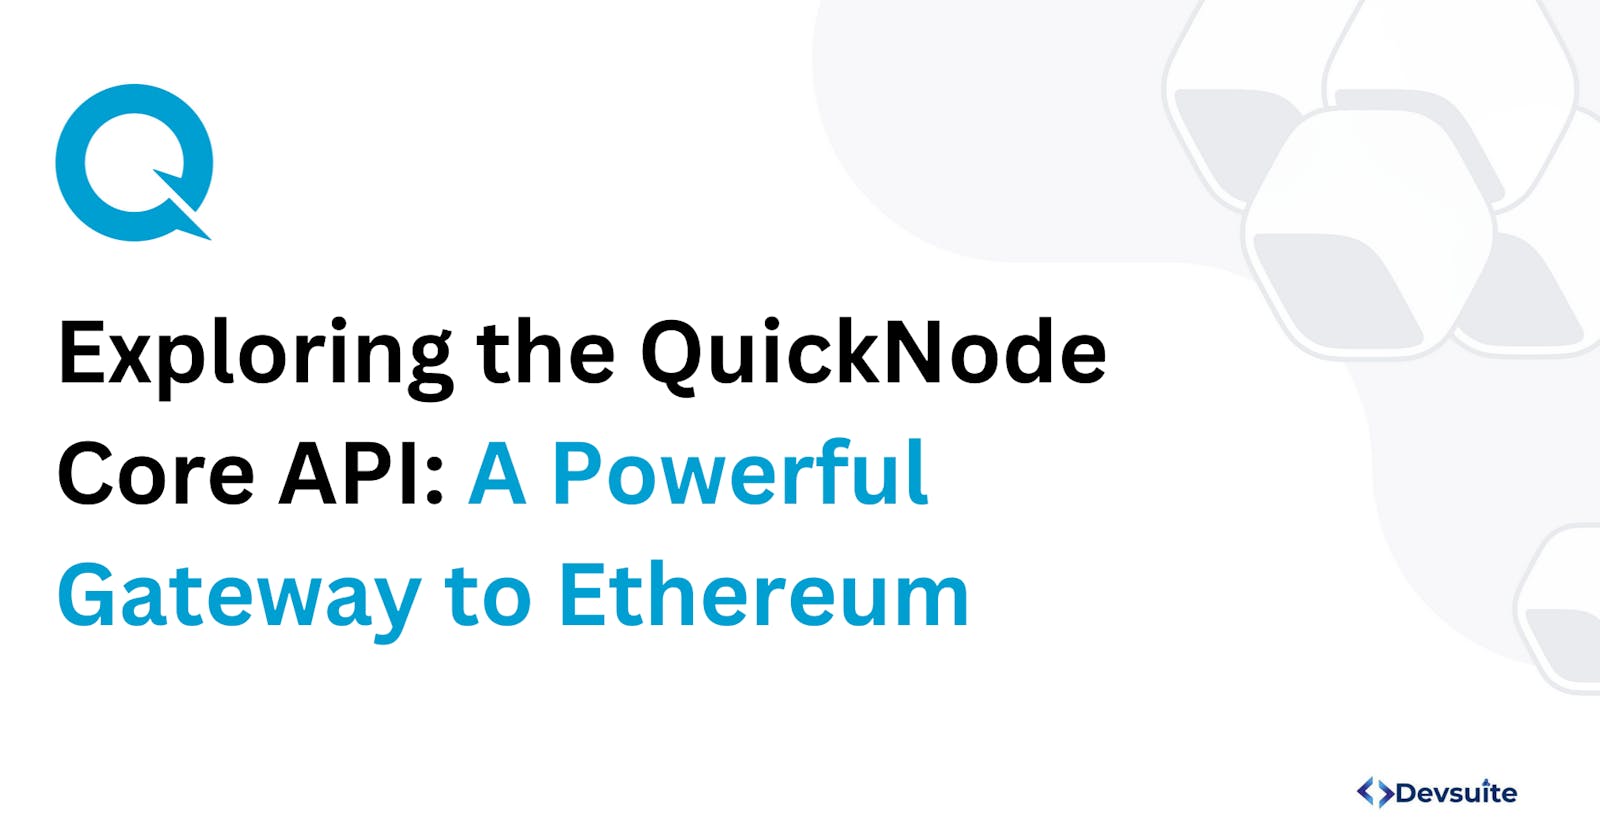 Exploring the QuickNode Core API: A Powerful Gateway to Ethereum